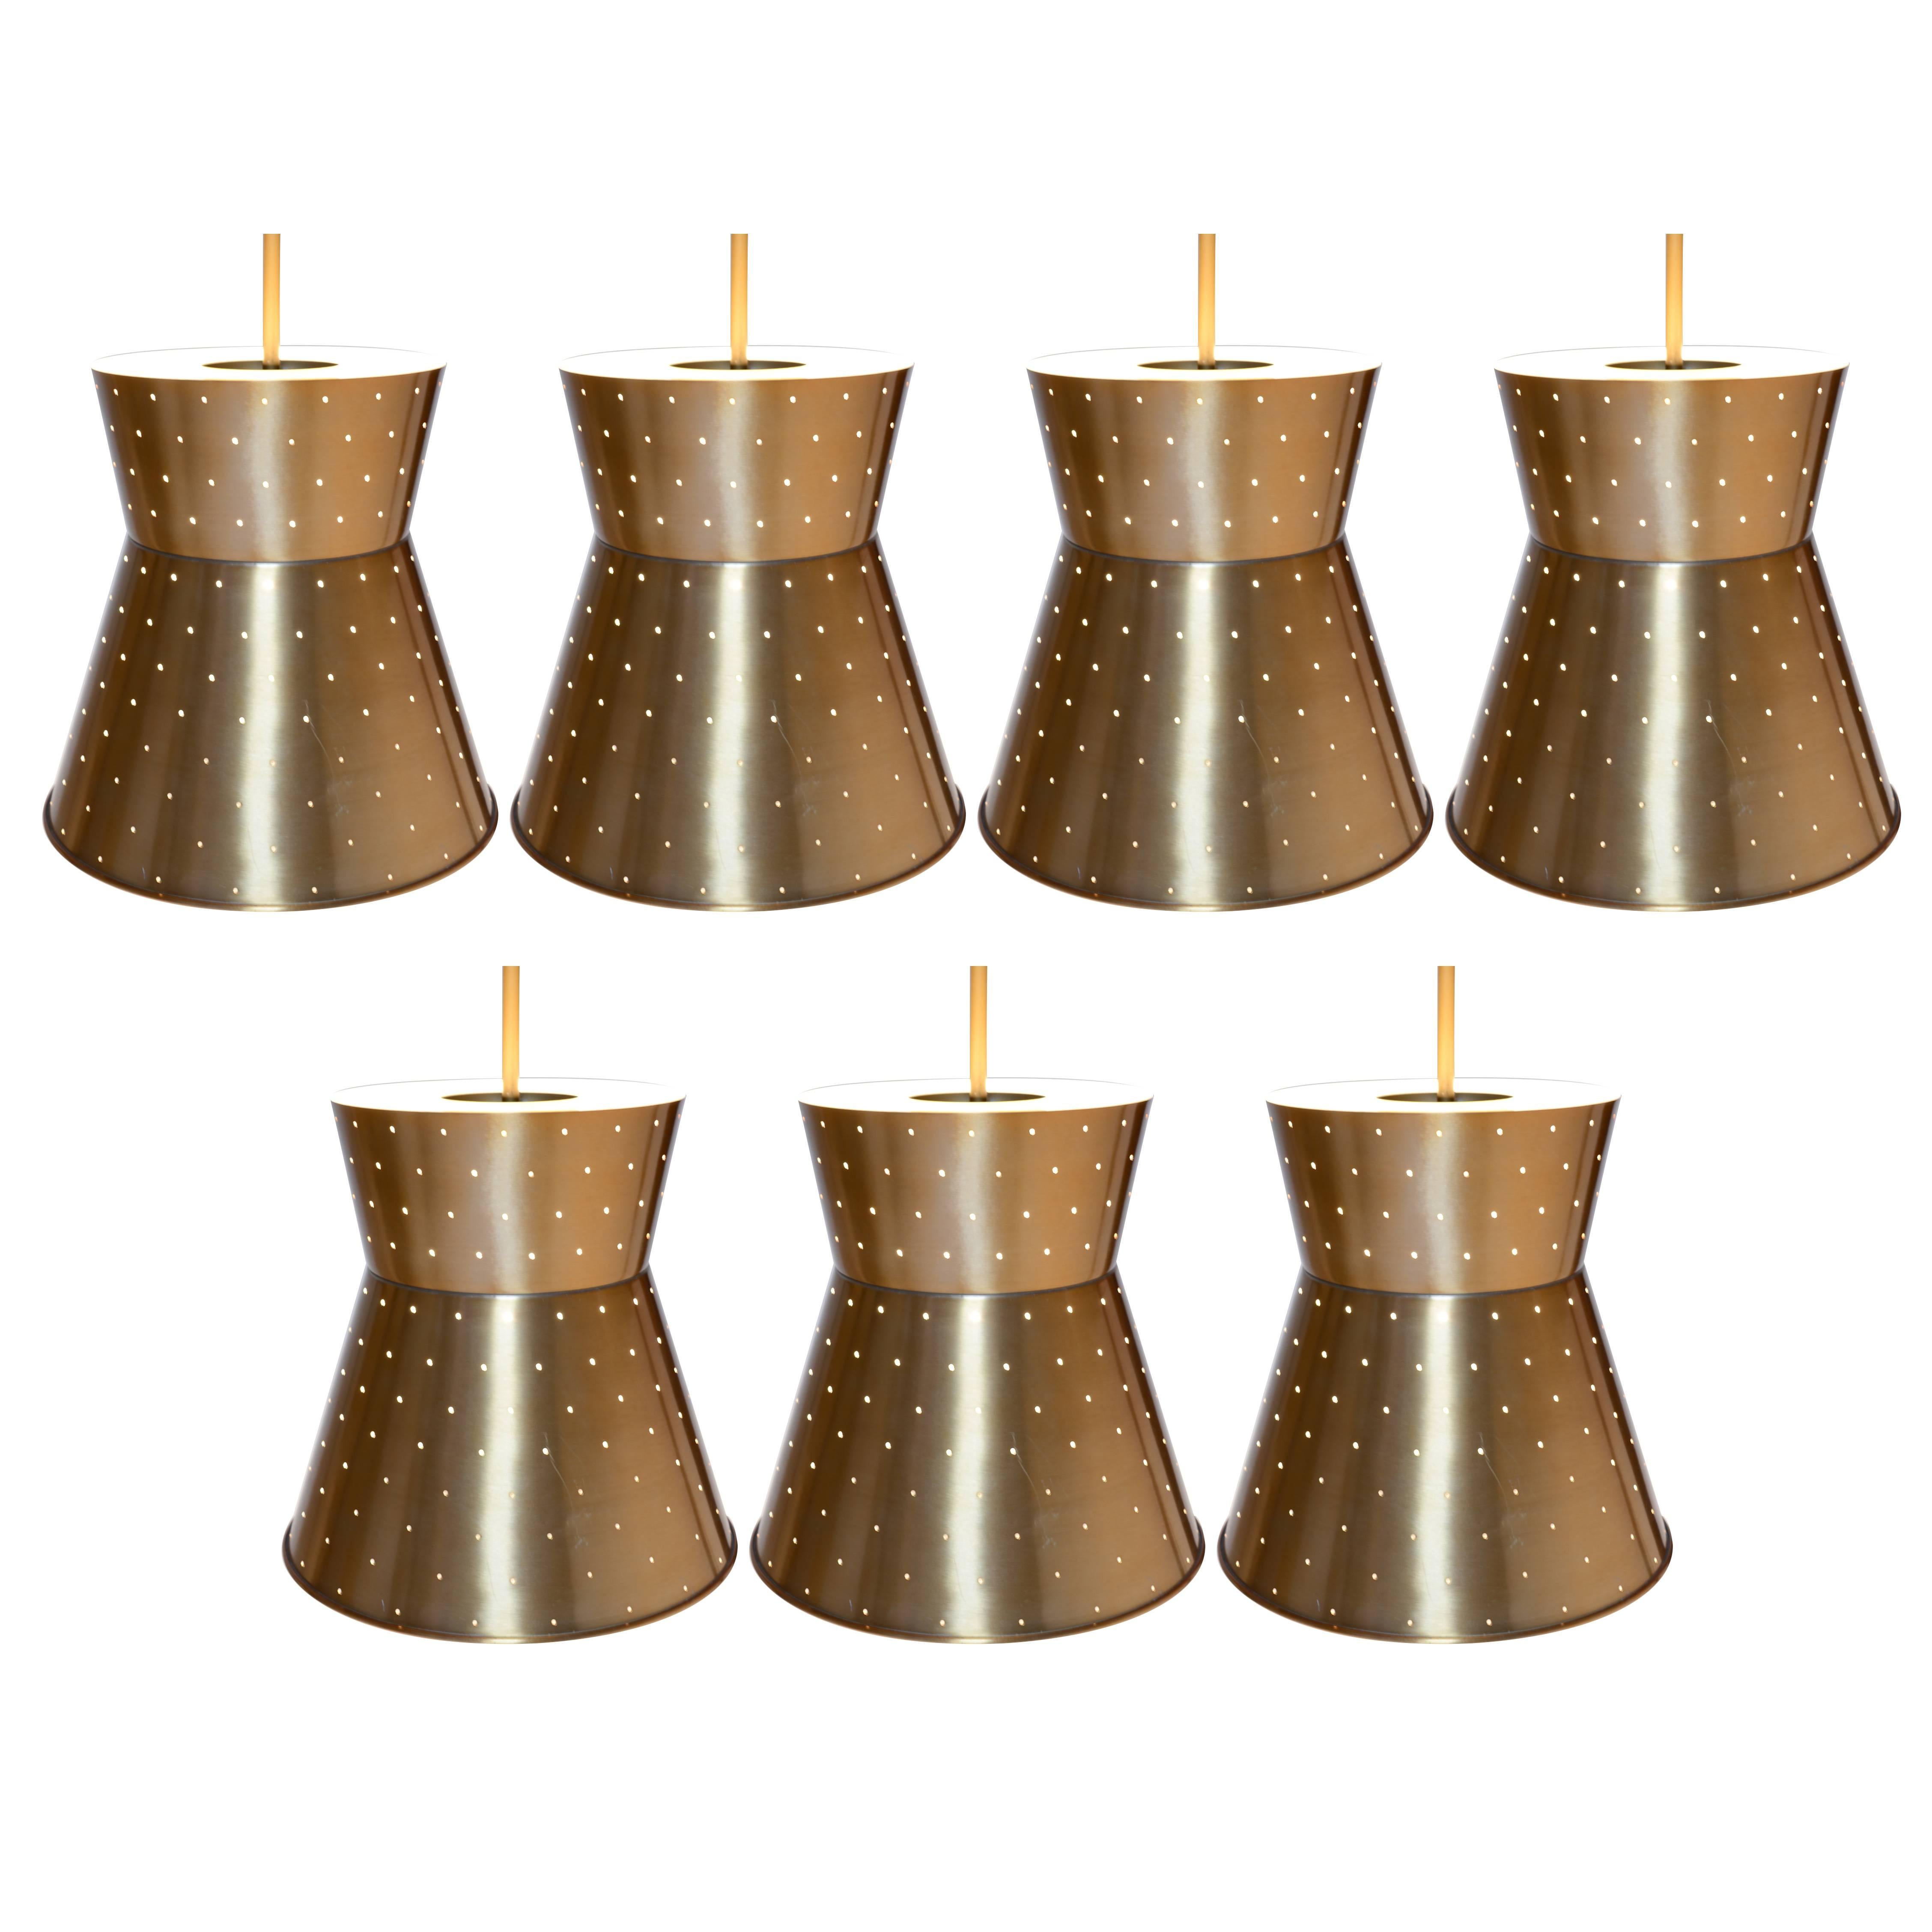 Up to a Set of Seven Starlite Medium Pendant Lamps